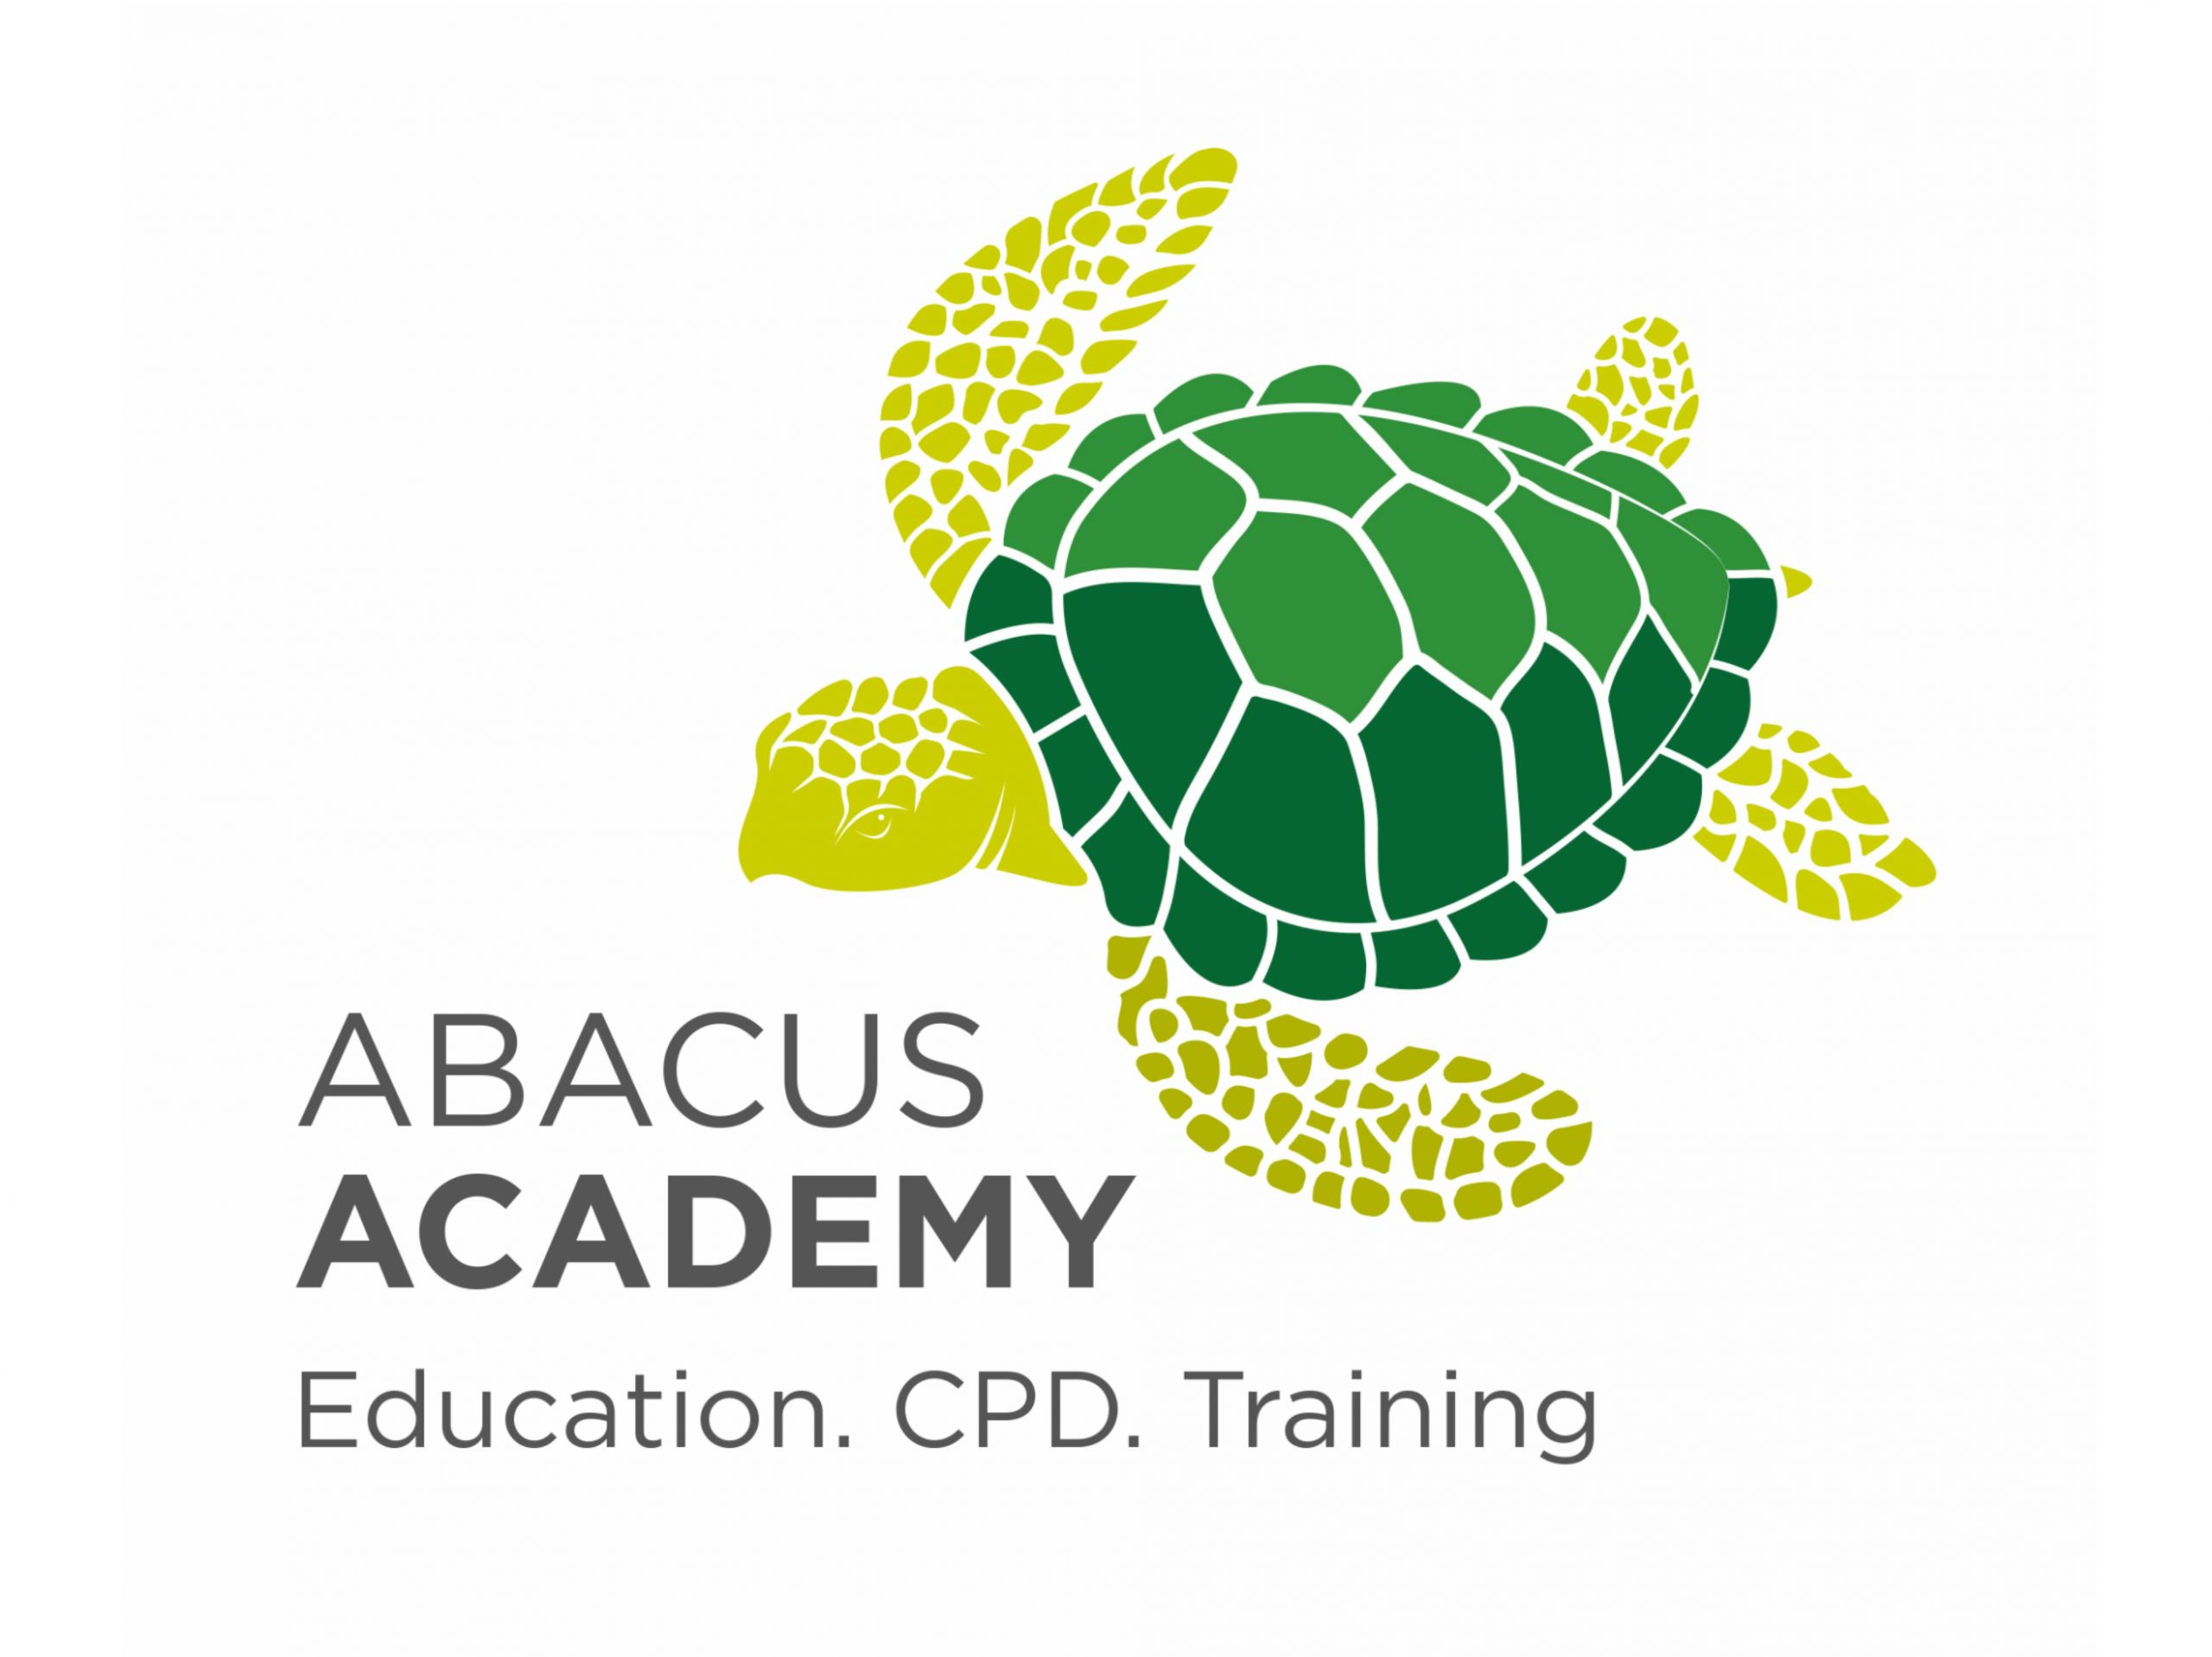 Abacus Academy to Launch for Latest CPD Healthcare Professional Education